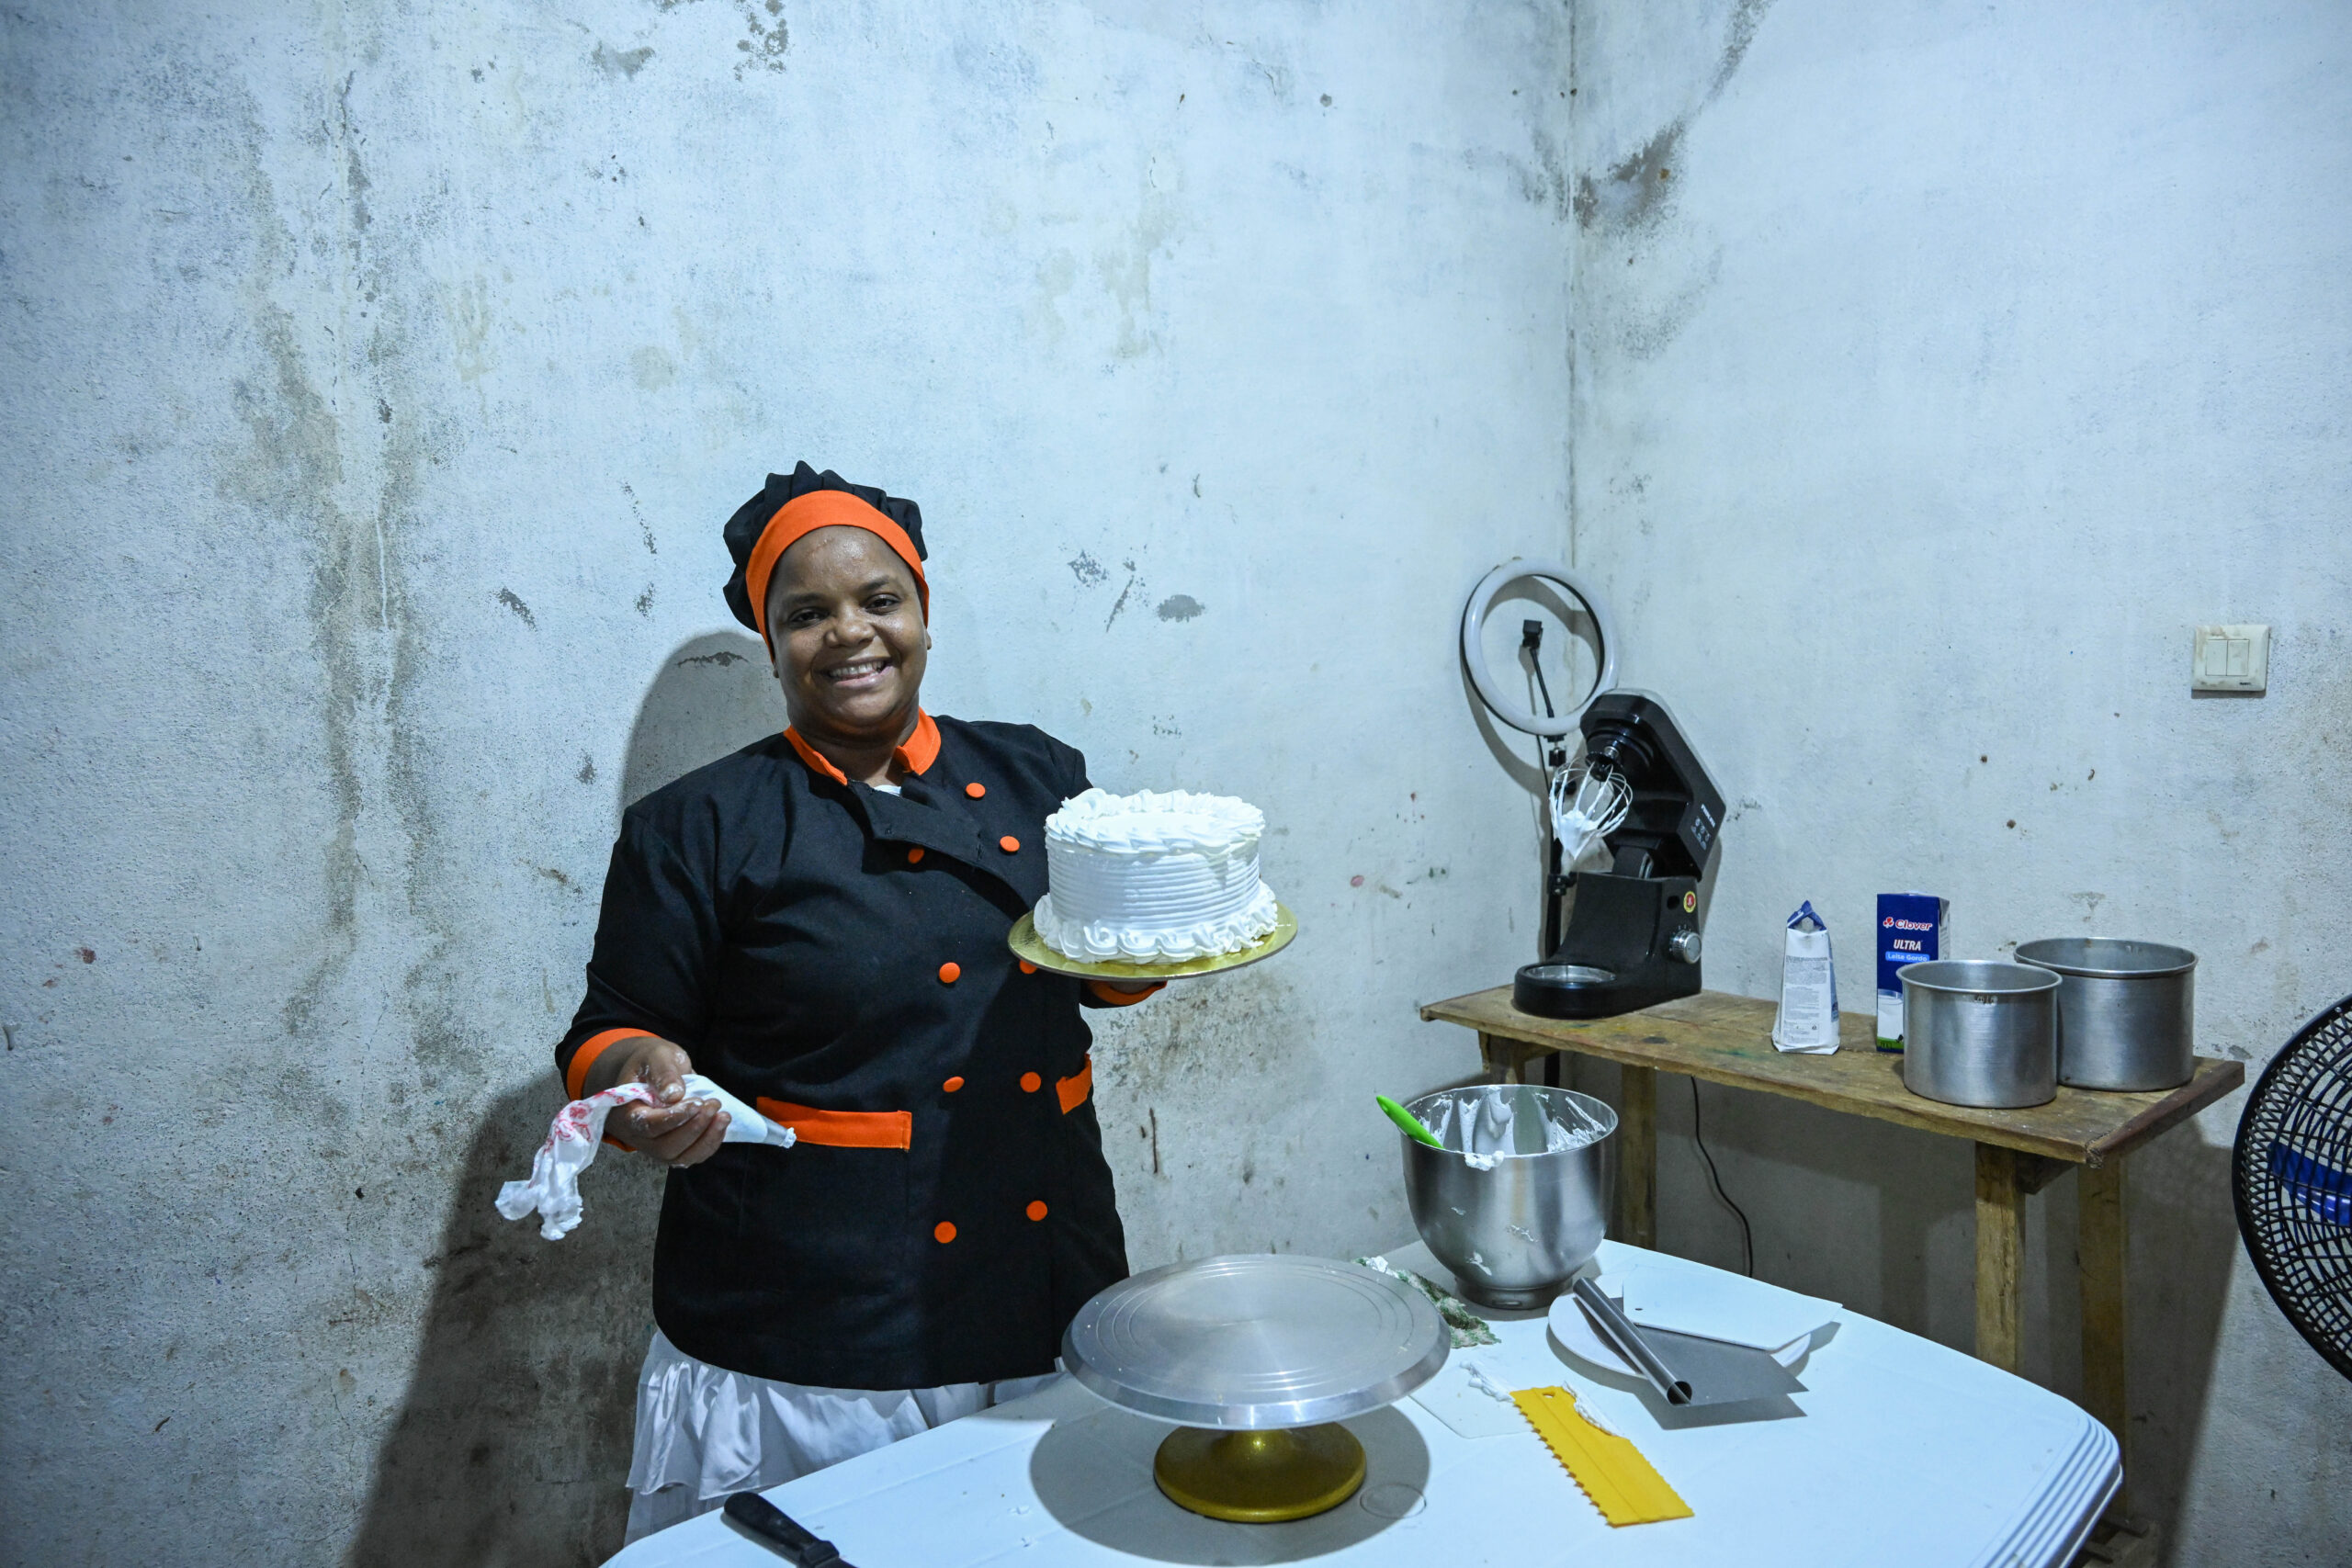 Baker and Teacher Lucia Sigauque smiling as she decorates a cake in her bakery. Lucia's growing business is creating new jobs and teaching other women the skills they need to open their own baking businesses, creating a ripple effect for the women she impacts in her community.